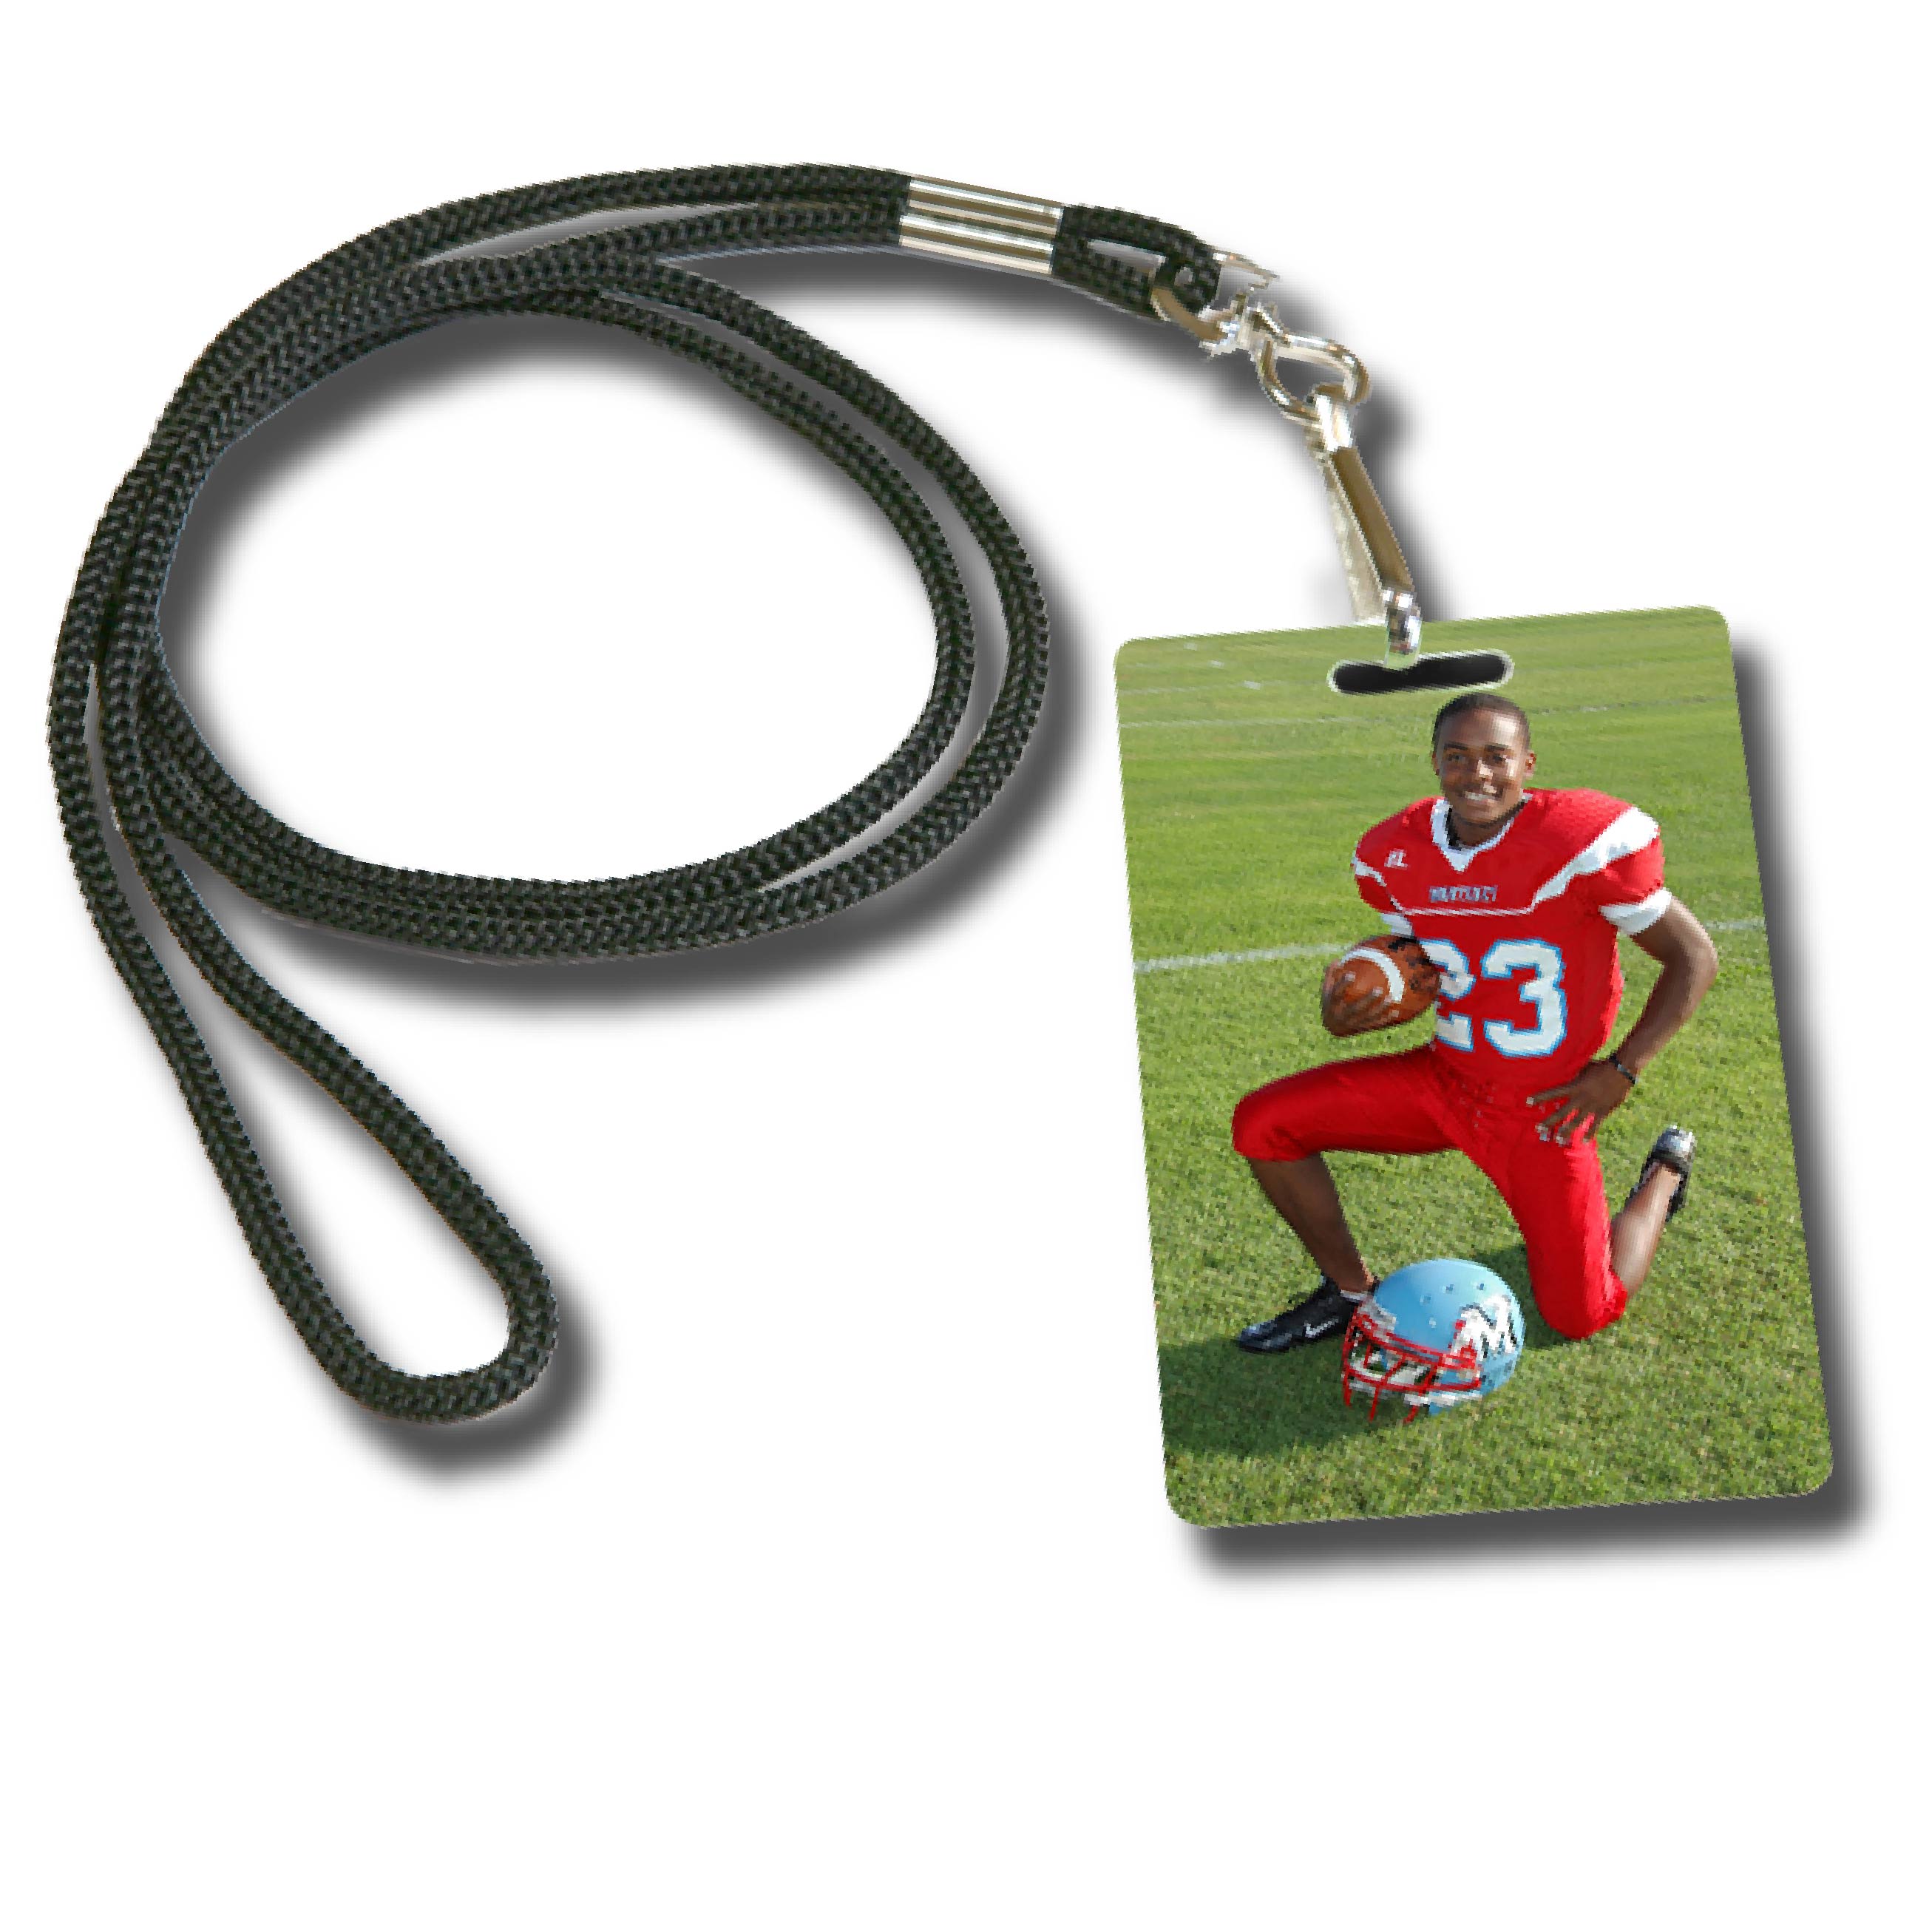 Football Player in Red Uniform Printed on Lanyard Tags